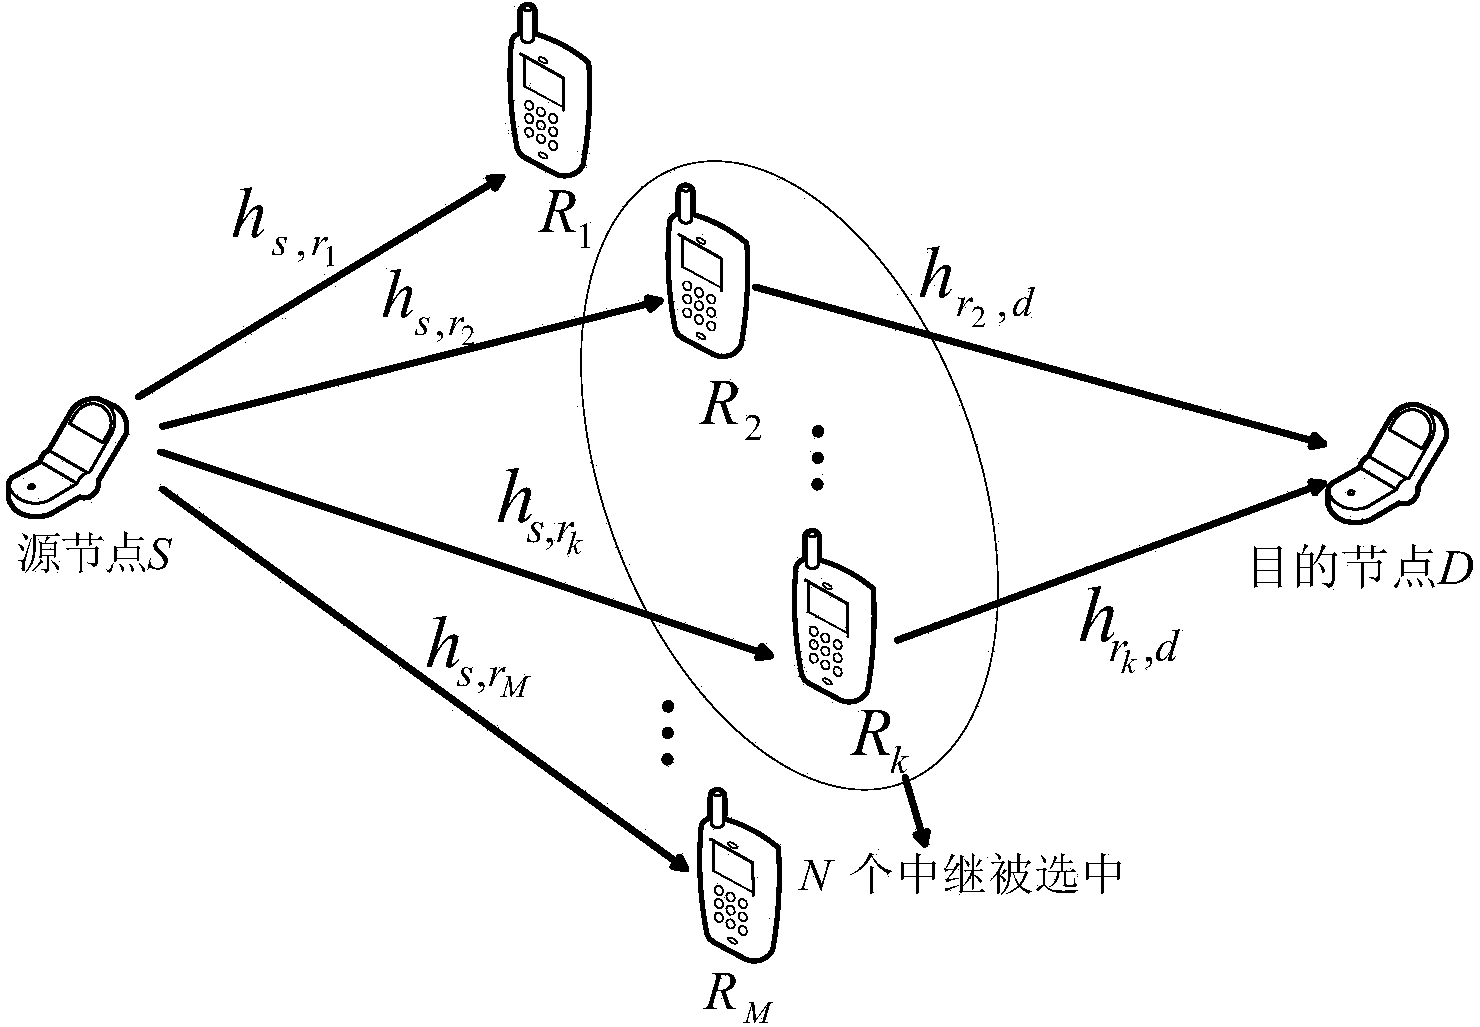 Multi-relay-selection and power distribution method based on system interrupt probability